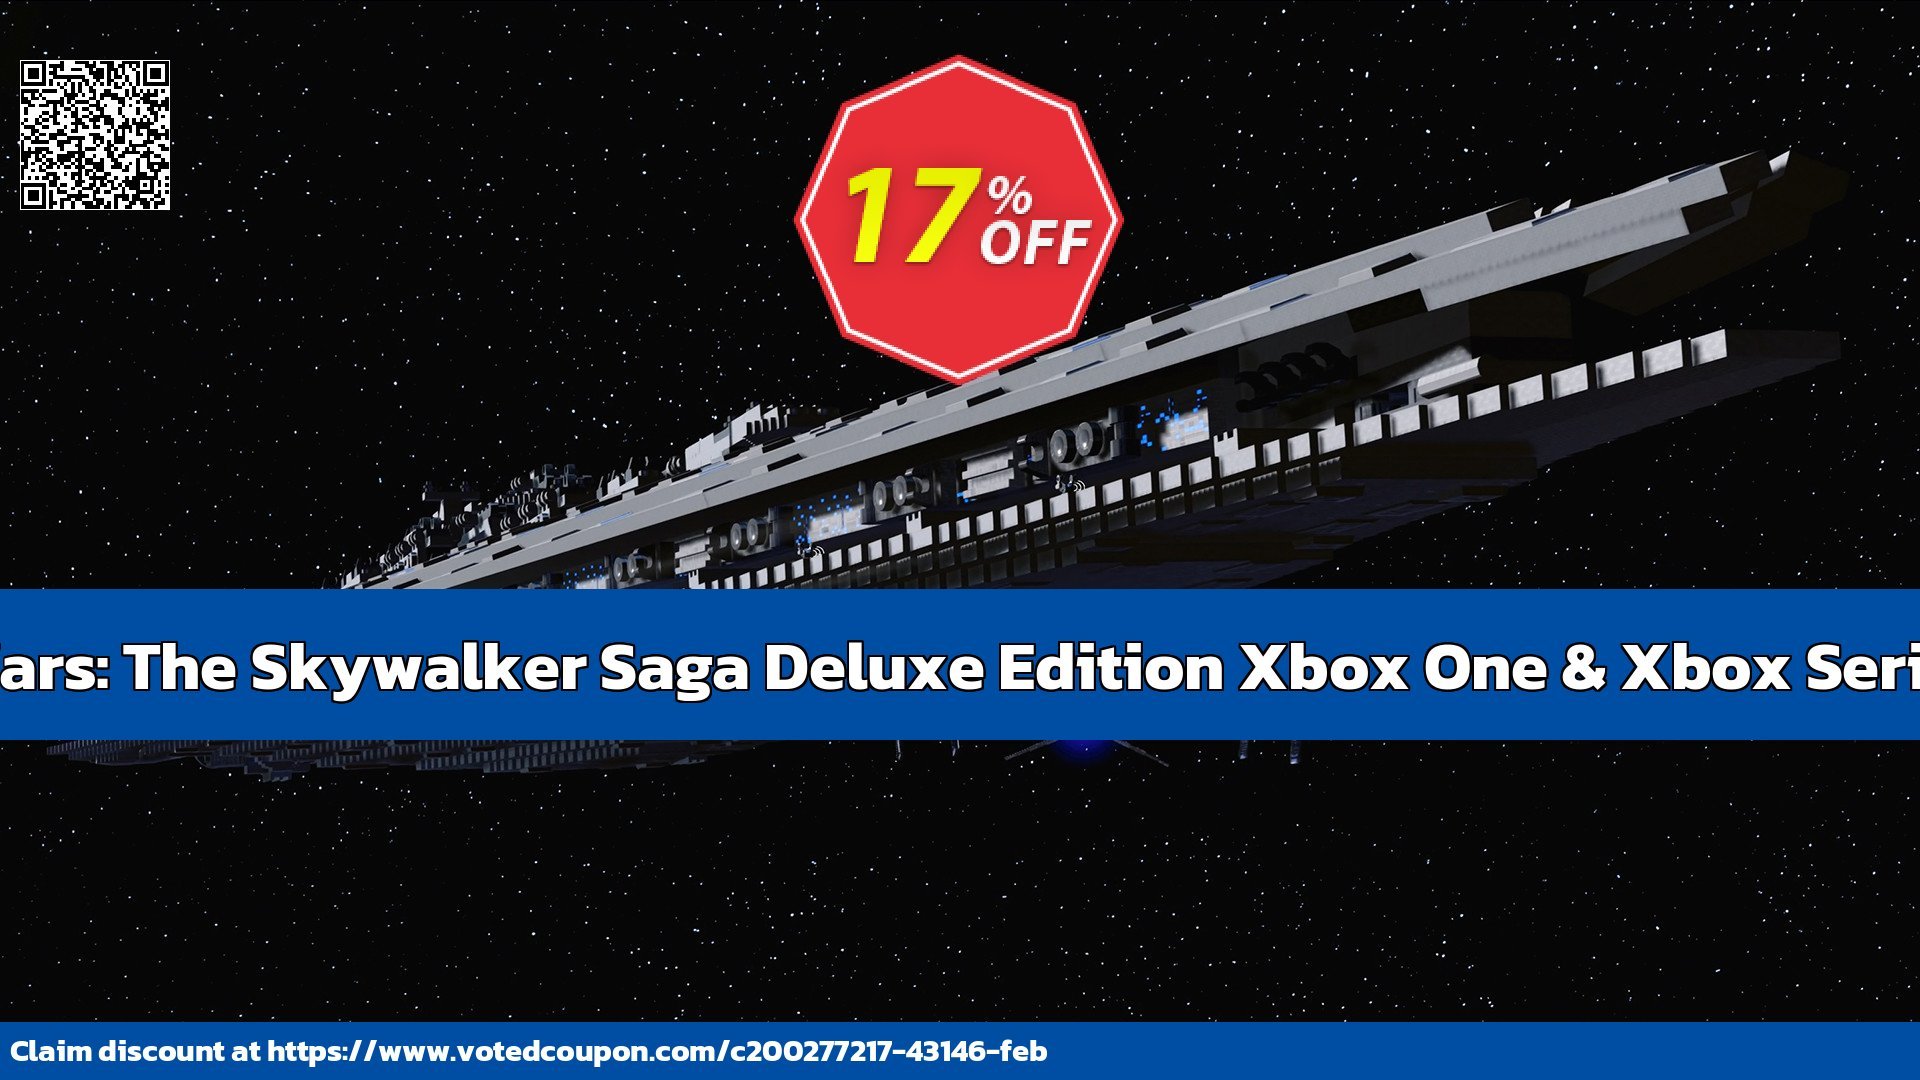 LEGO Star Wars: The Skywalker Saga Deluxe Edition Xbox One & Xbox Series X|S, WW  Coupon Code May 2024, 17% OFF - VotedCoupon